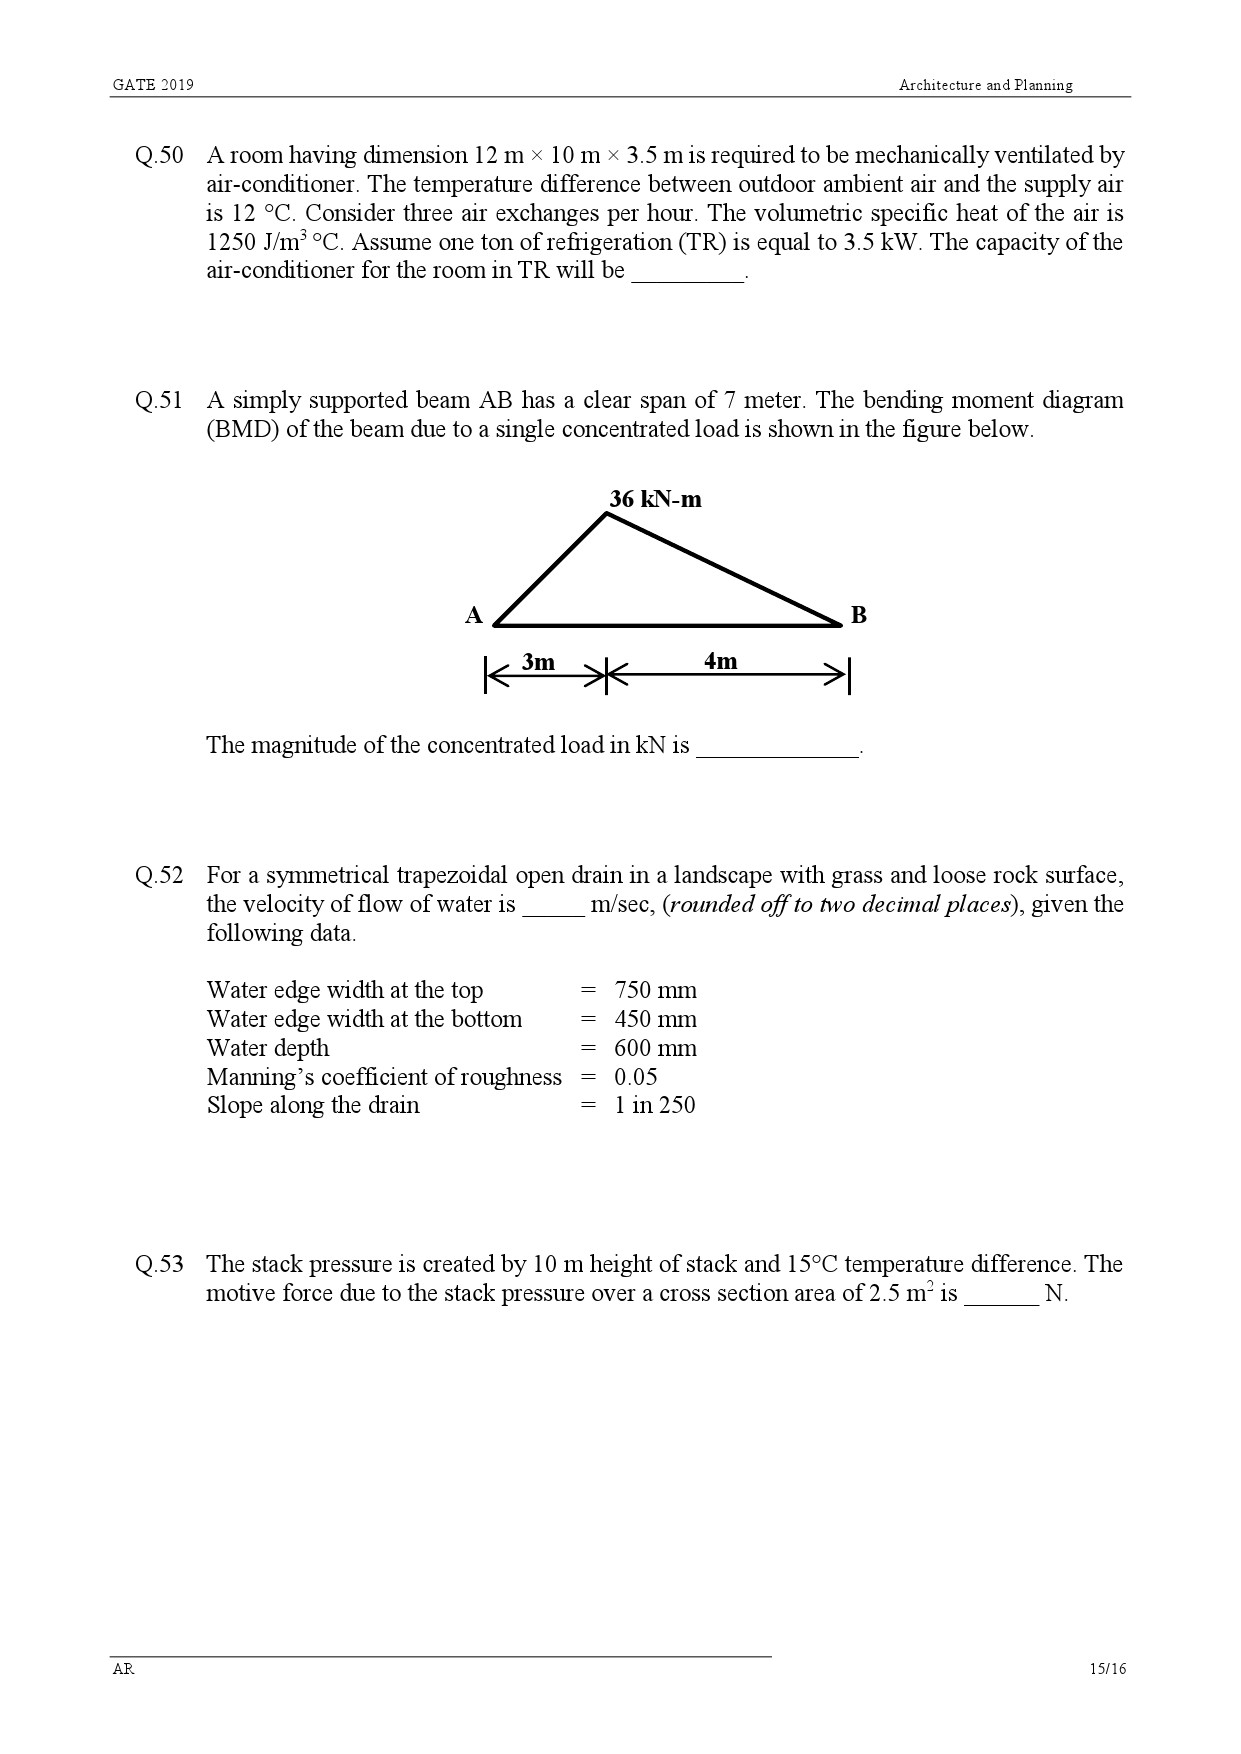 GATE Exam Question Paper 2019 Architecture and Planning 18